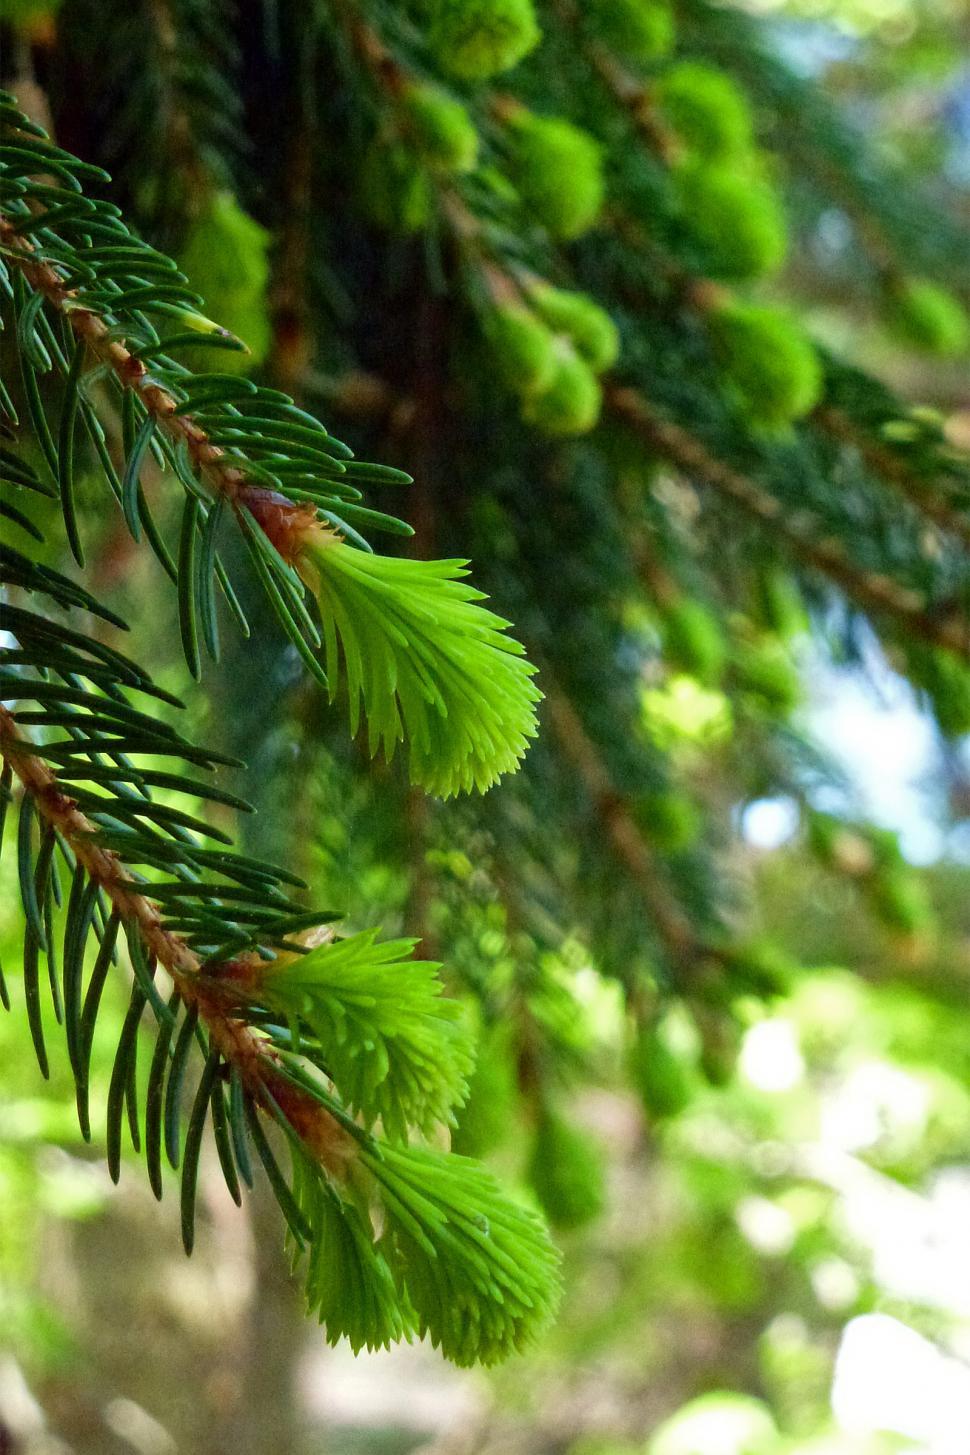 Free Image of Pine Needles, Spring Growth Close-up  